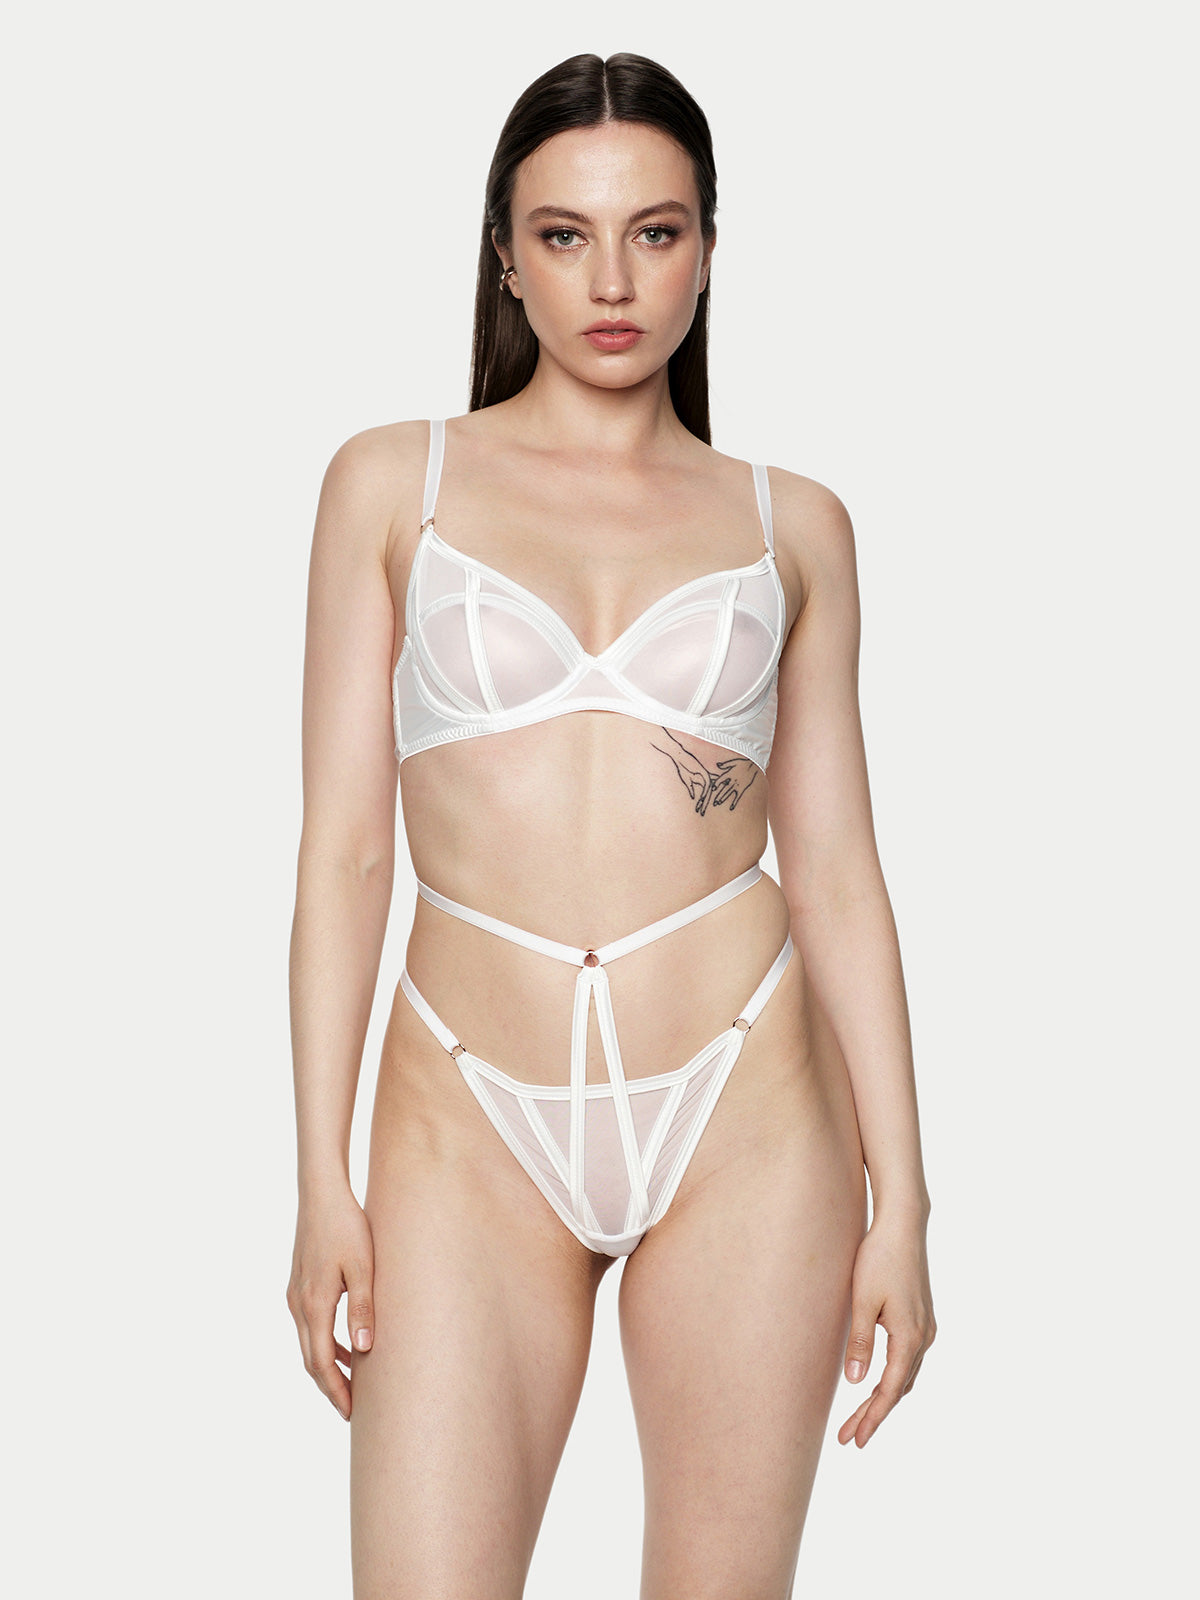 Candie Lingerie Set in White